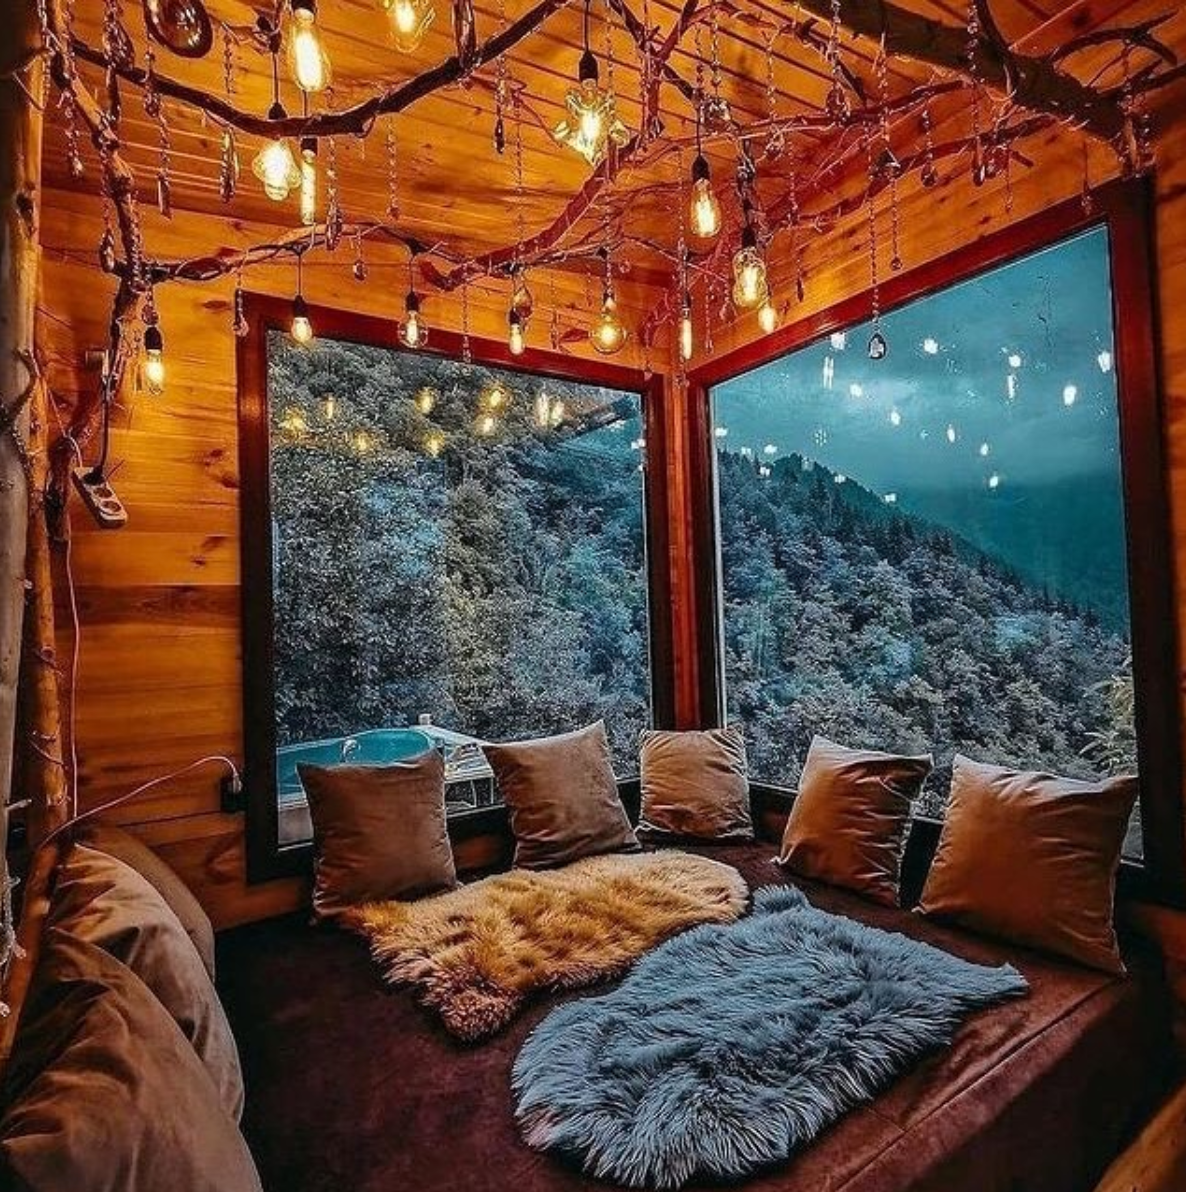 Rustic wooden bedroom adorned with string lights and thick fur throws for a decidedly friluftsliv look.